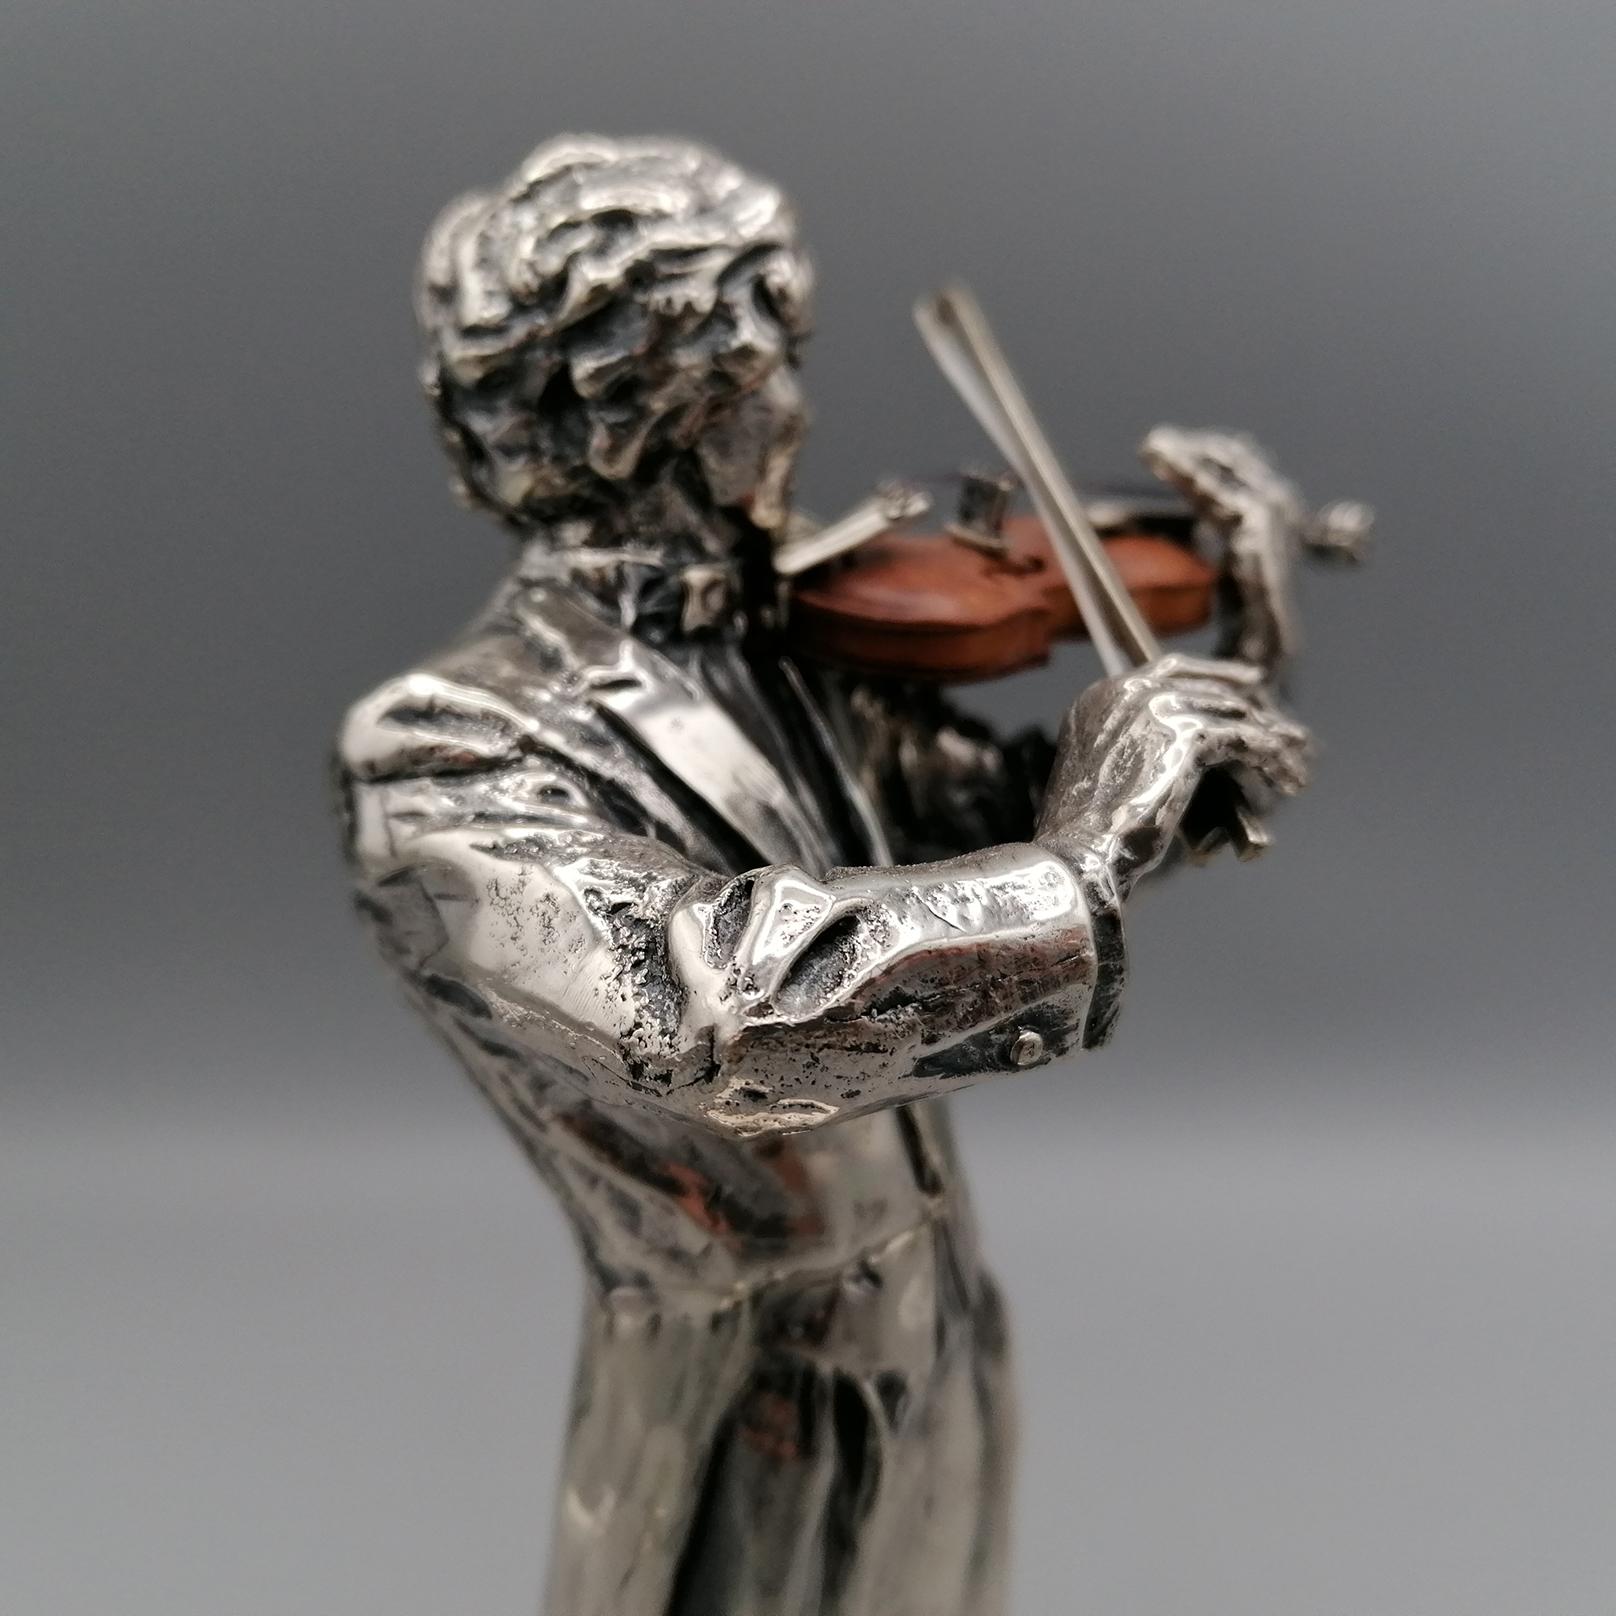 2oth Century Italian Solid Silver Violinist statue with wooden violin For Sale 1